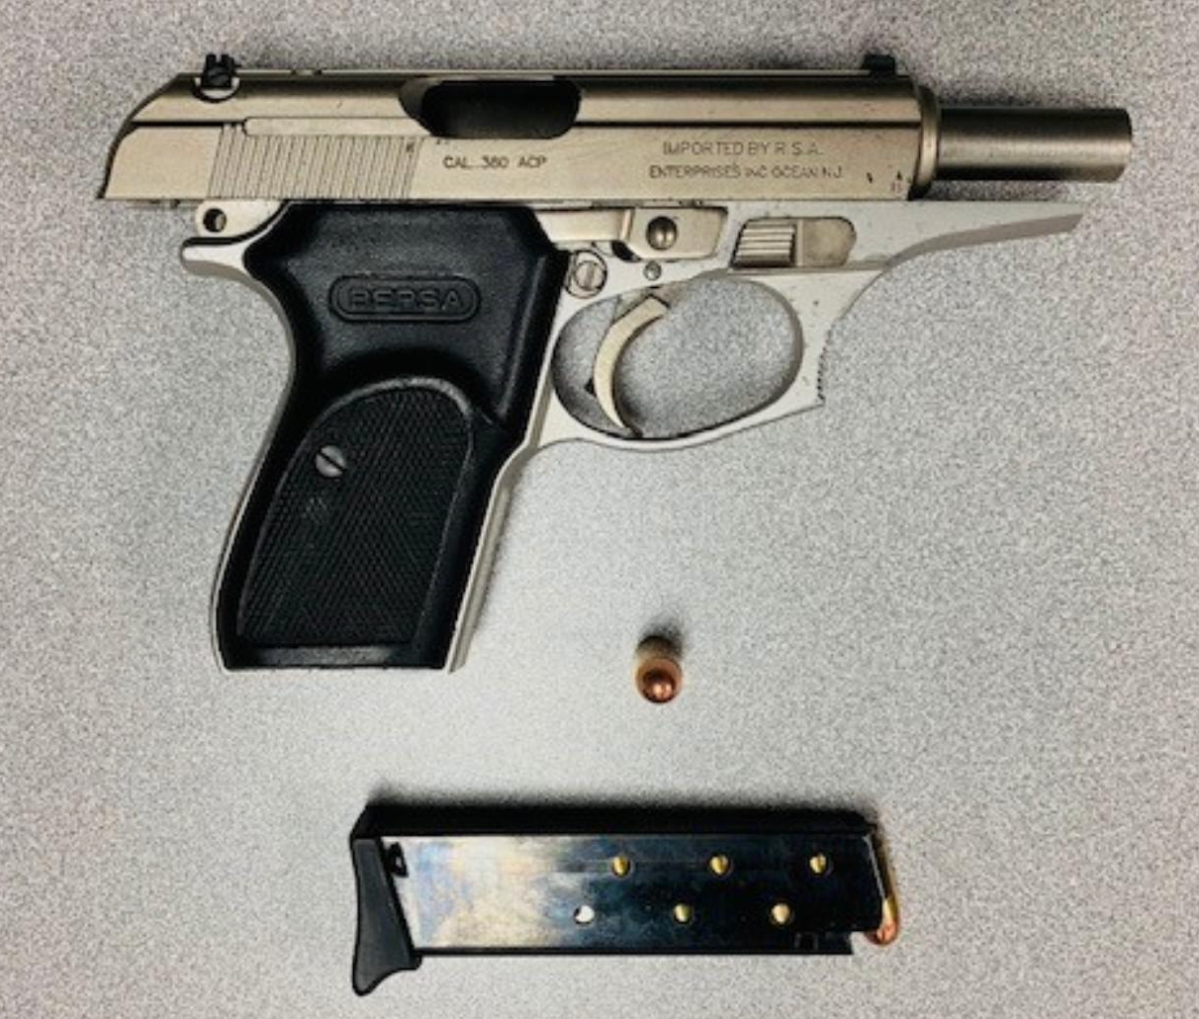 Police in LIndsay, Ont., seized drugs and a firearm as part of an investigation.